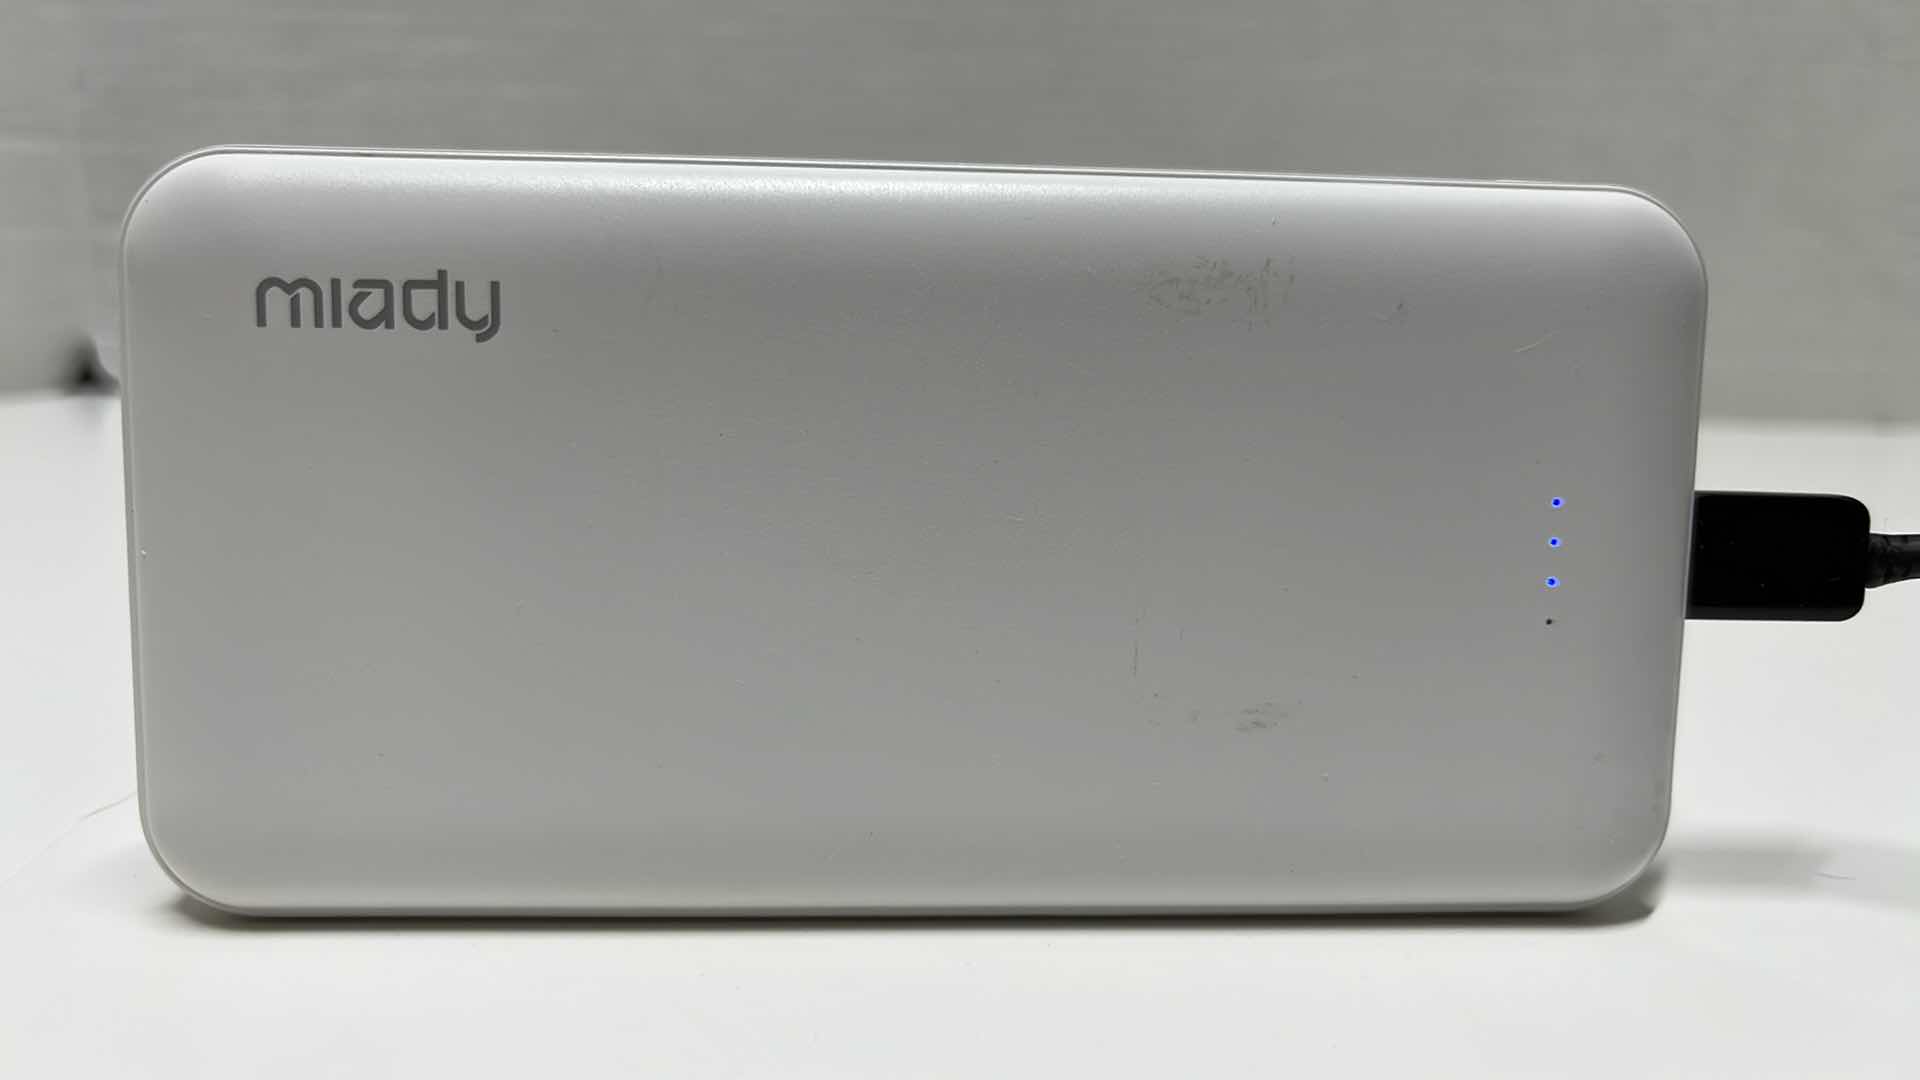 Photo 2 of MIADY 10000mAh DUAL USB PORTABLE CHARGER FAST CHARGING POWER BANK W USB TYPE C CORD, MODEL AS-TPB21